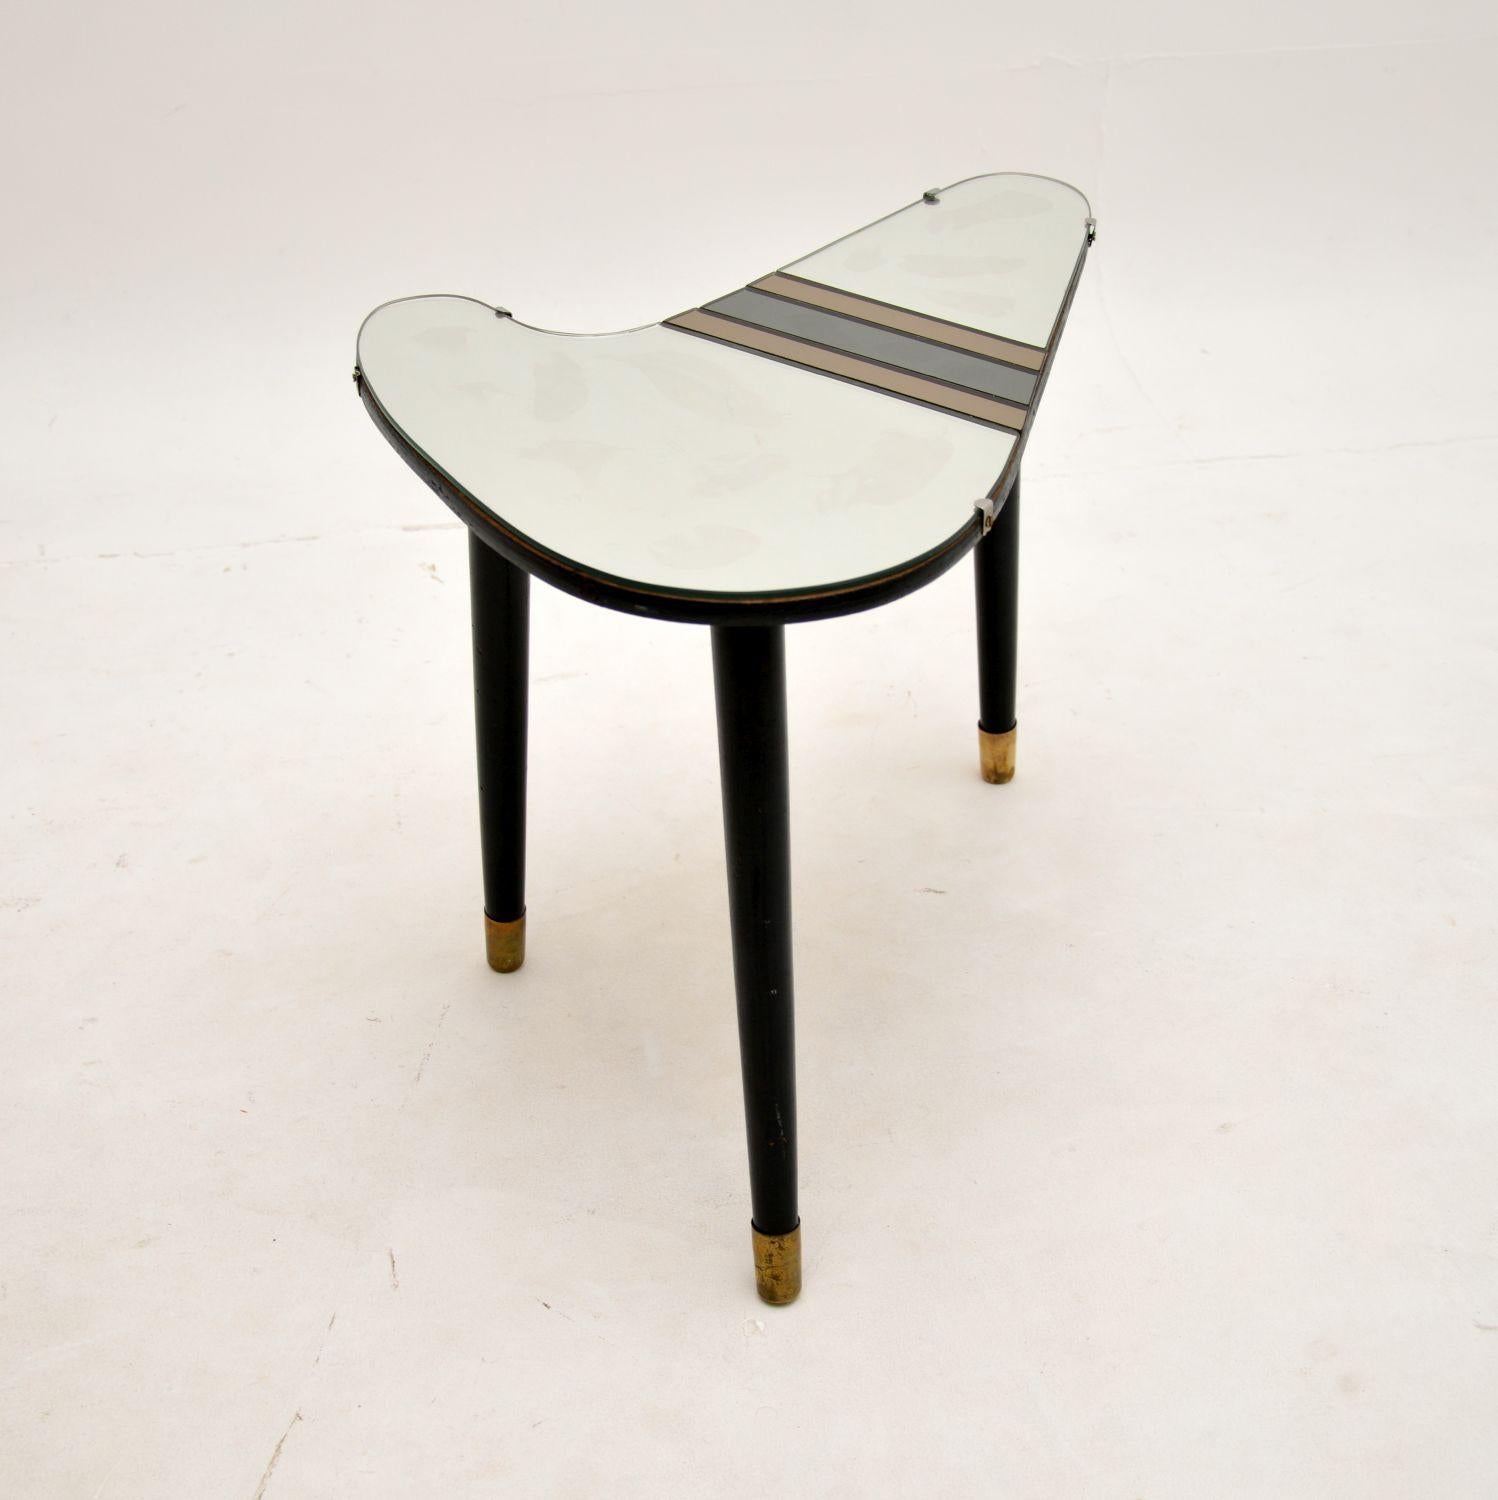 British Vintage Mirrored Top Side Table For Sale